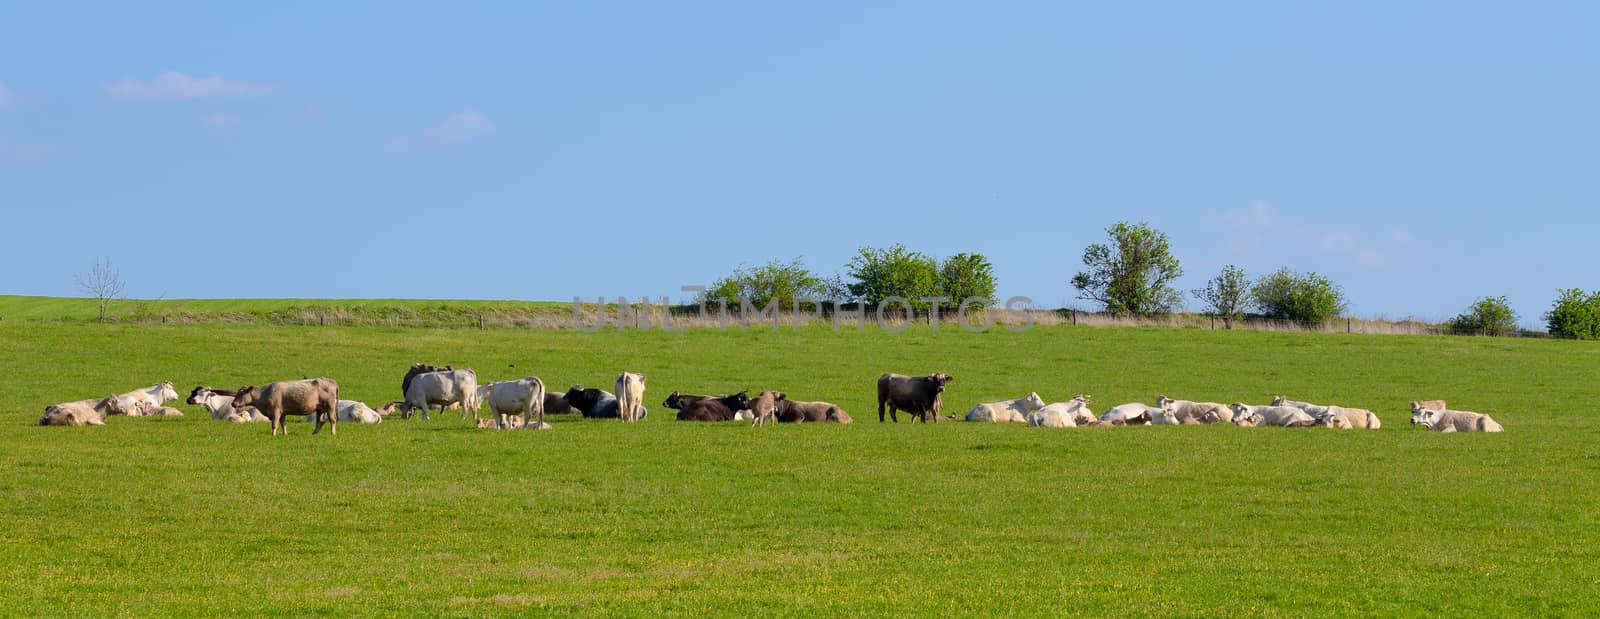 Herd of cows at spring green field by artush